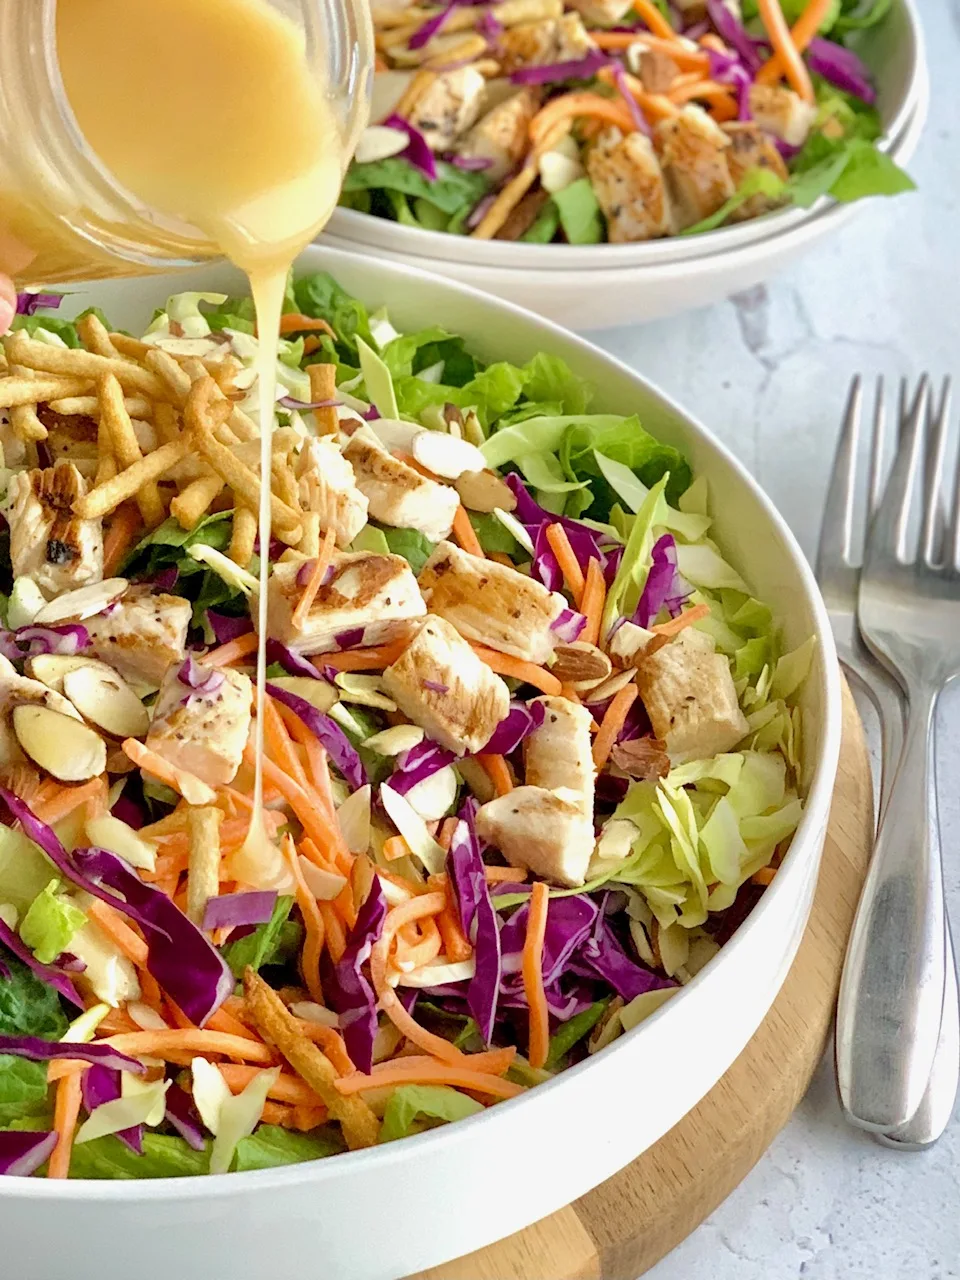 A large salad in a serving platter. The salad has cuts of romaine lettuce, purple cabbage, light green napa cabbage, chunks of grilled chicken, shredded carrots, and lots of sliced almonds. There is even a few strips of wonton strips. Over the top of the salad is a dressing being poured onto it.